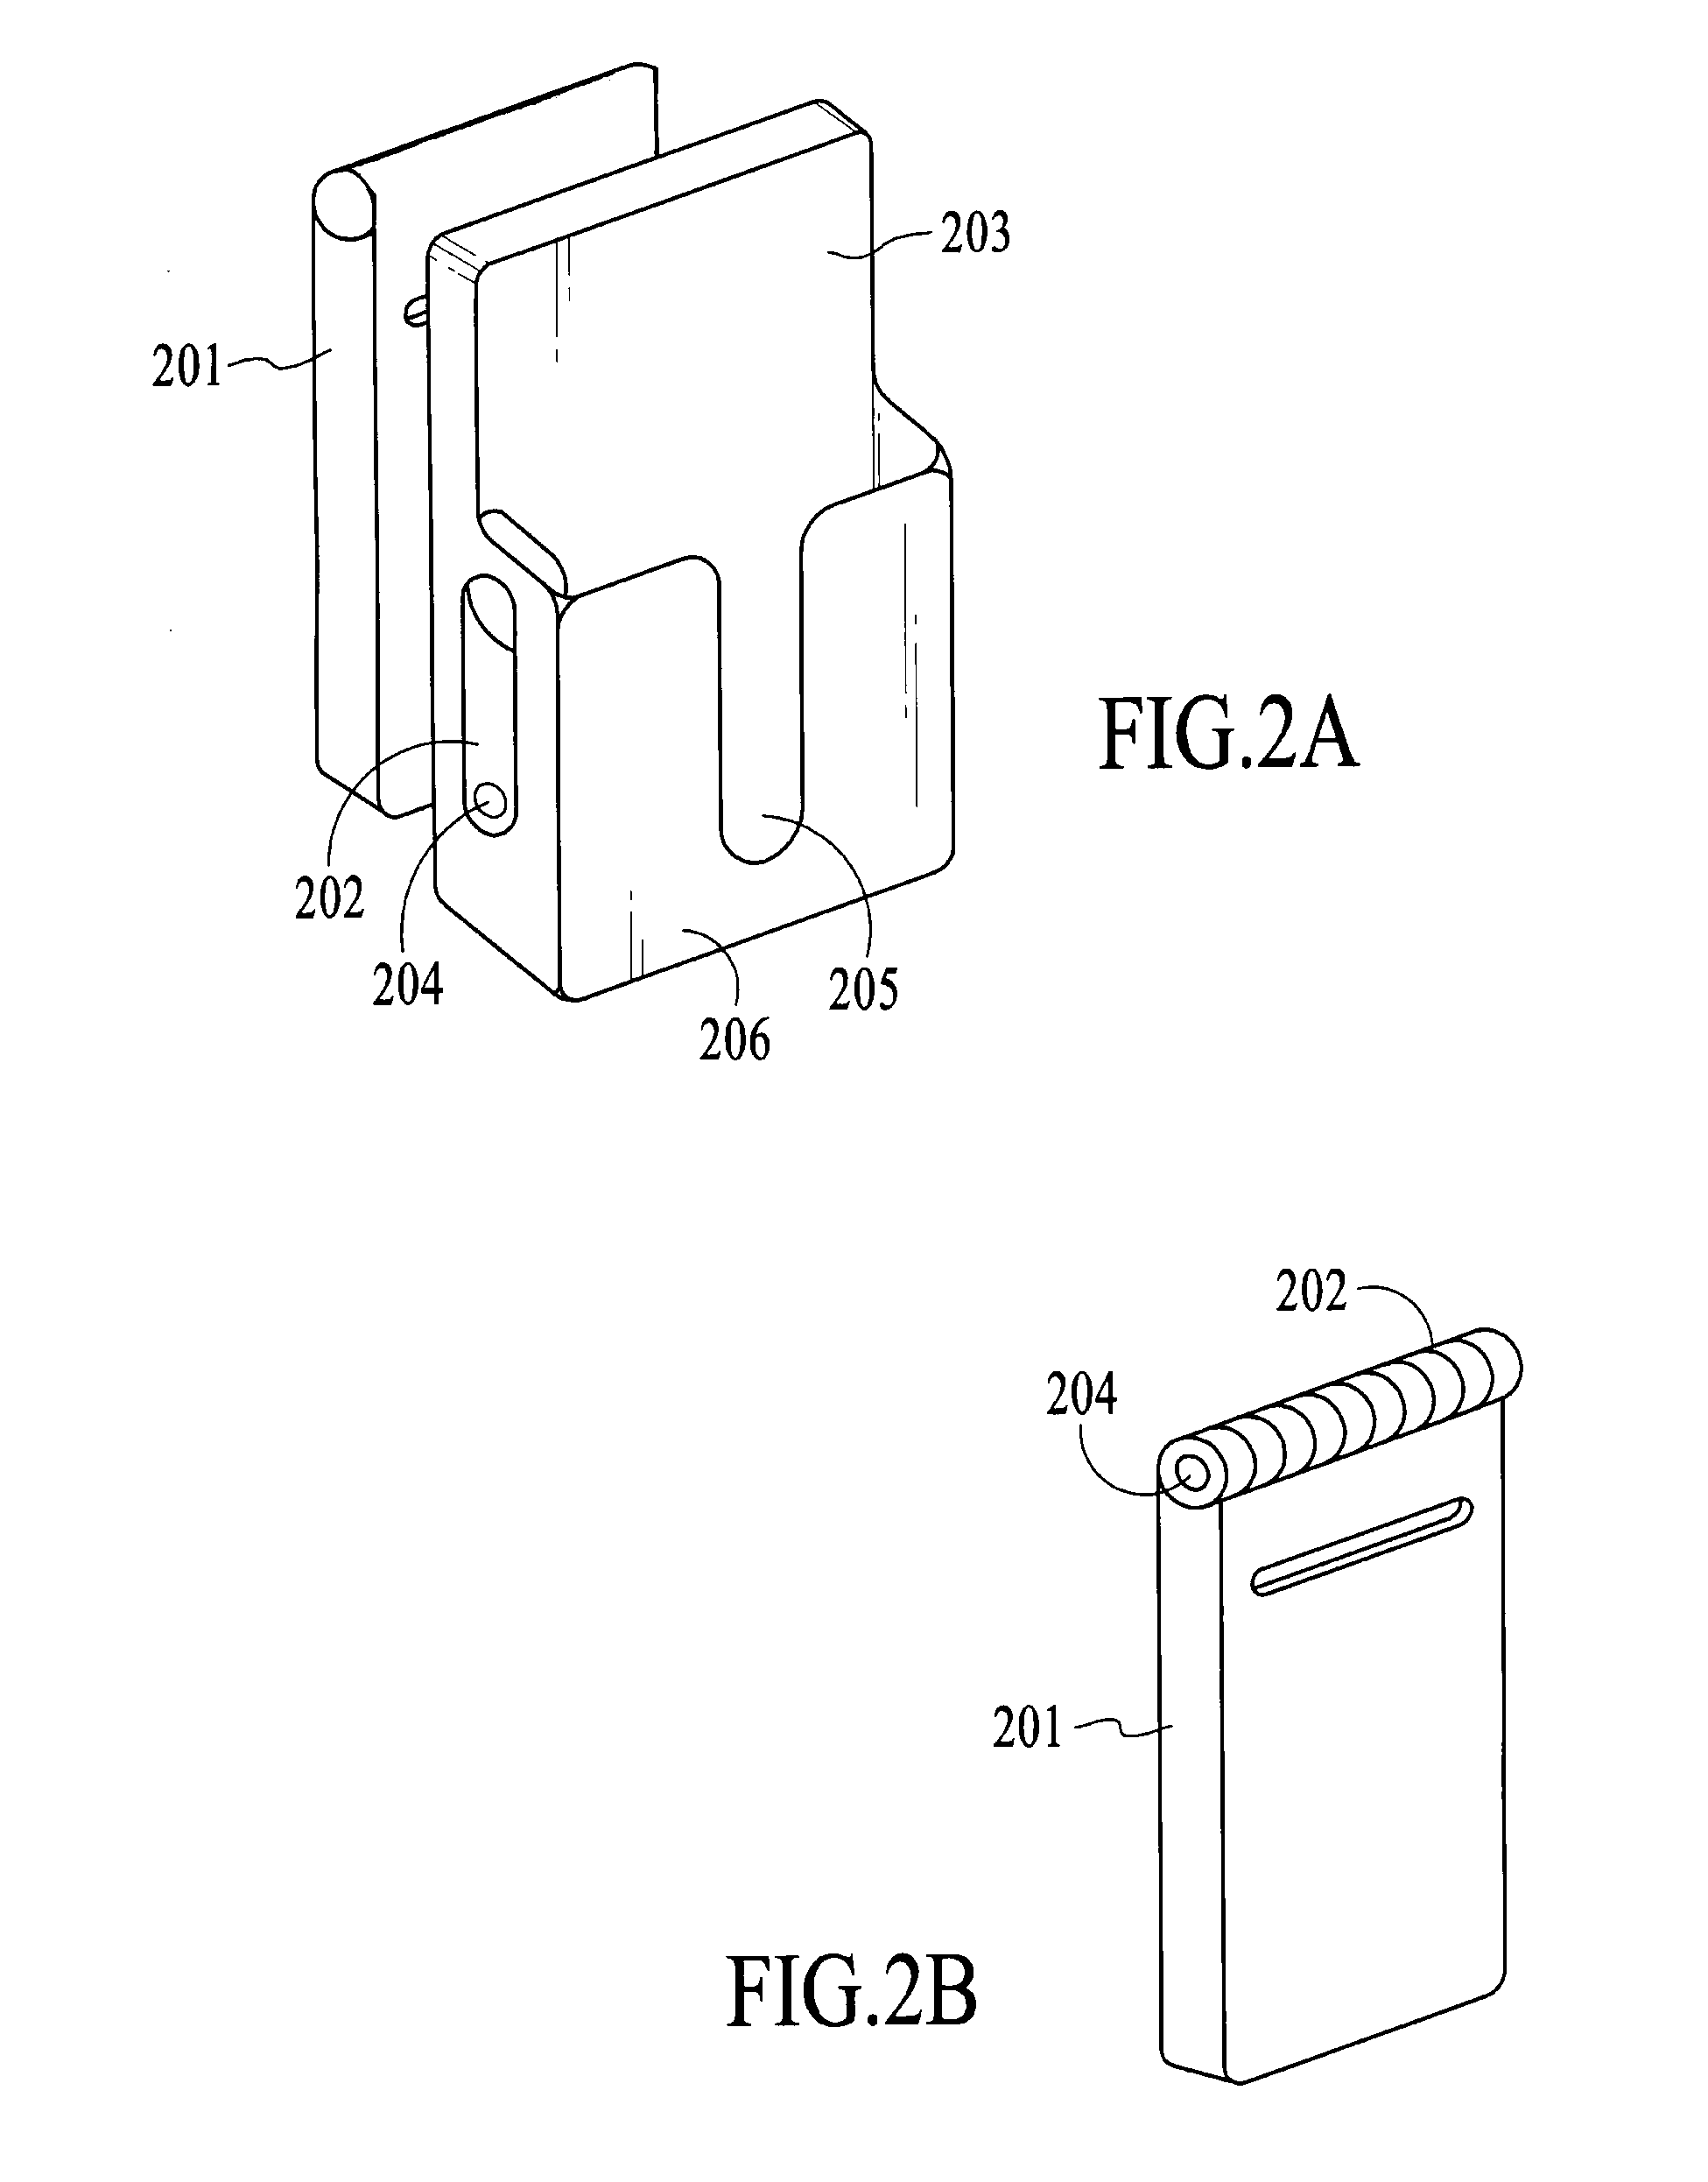 Glucose measuring device integrated into a holster for a personal area network device